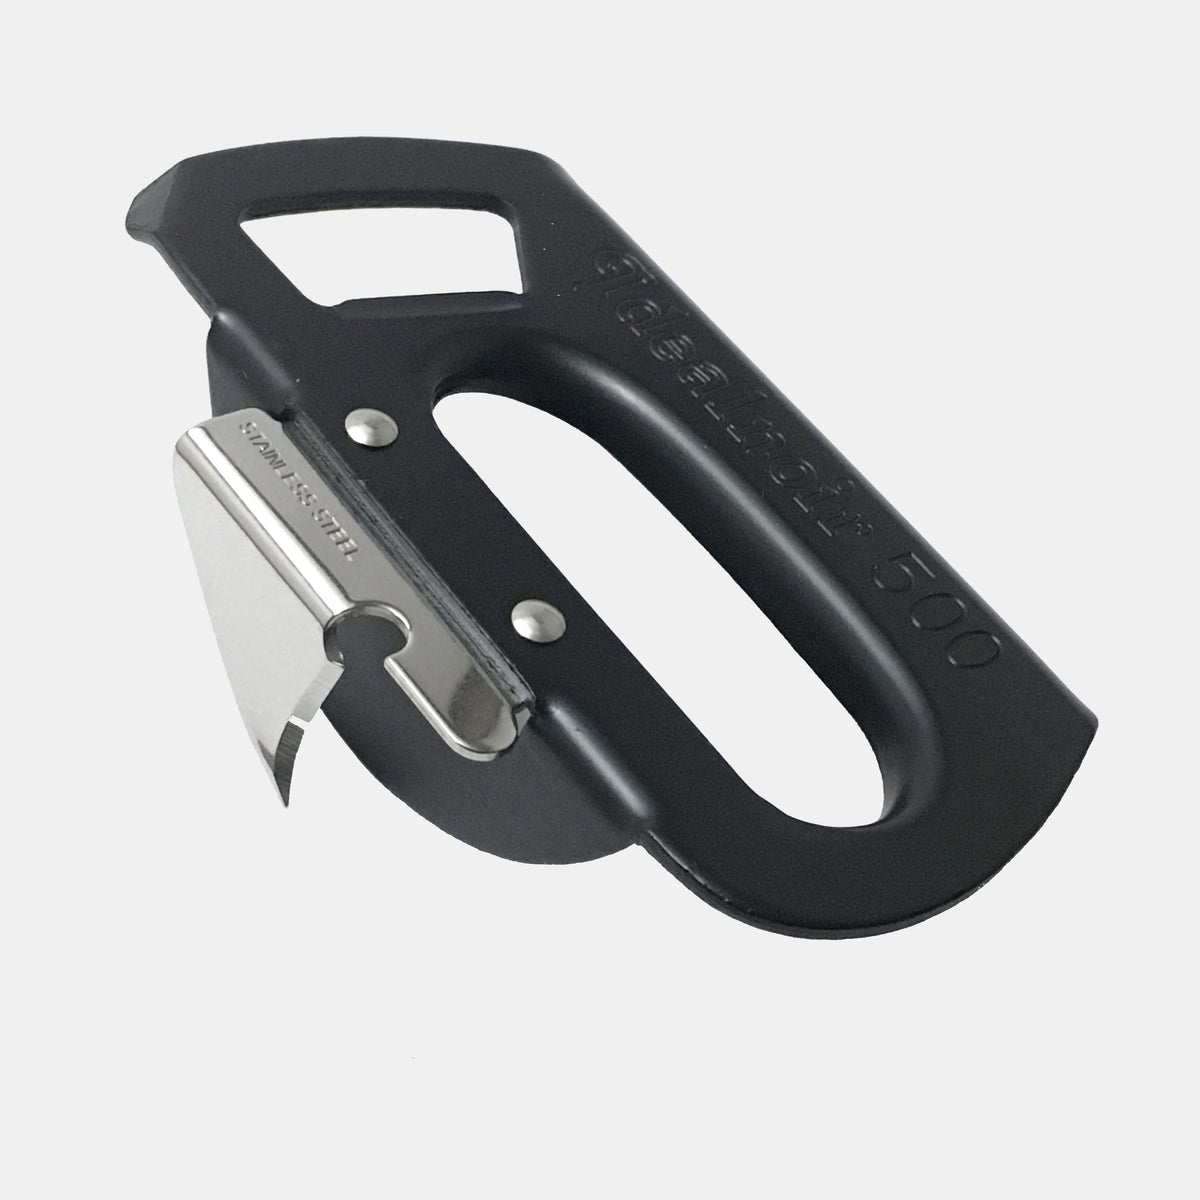 Idealnoir No. 500 Can Opener – ombrato